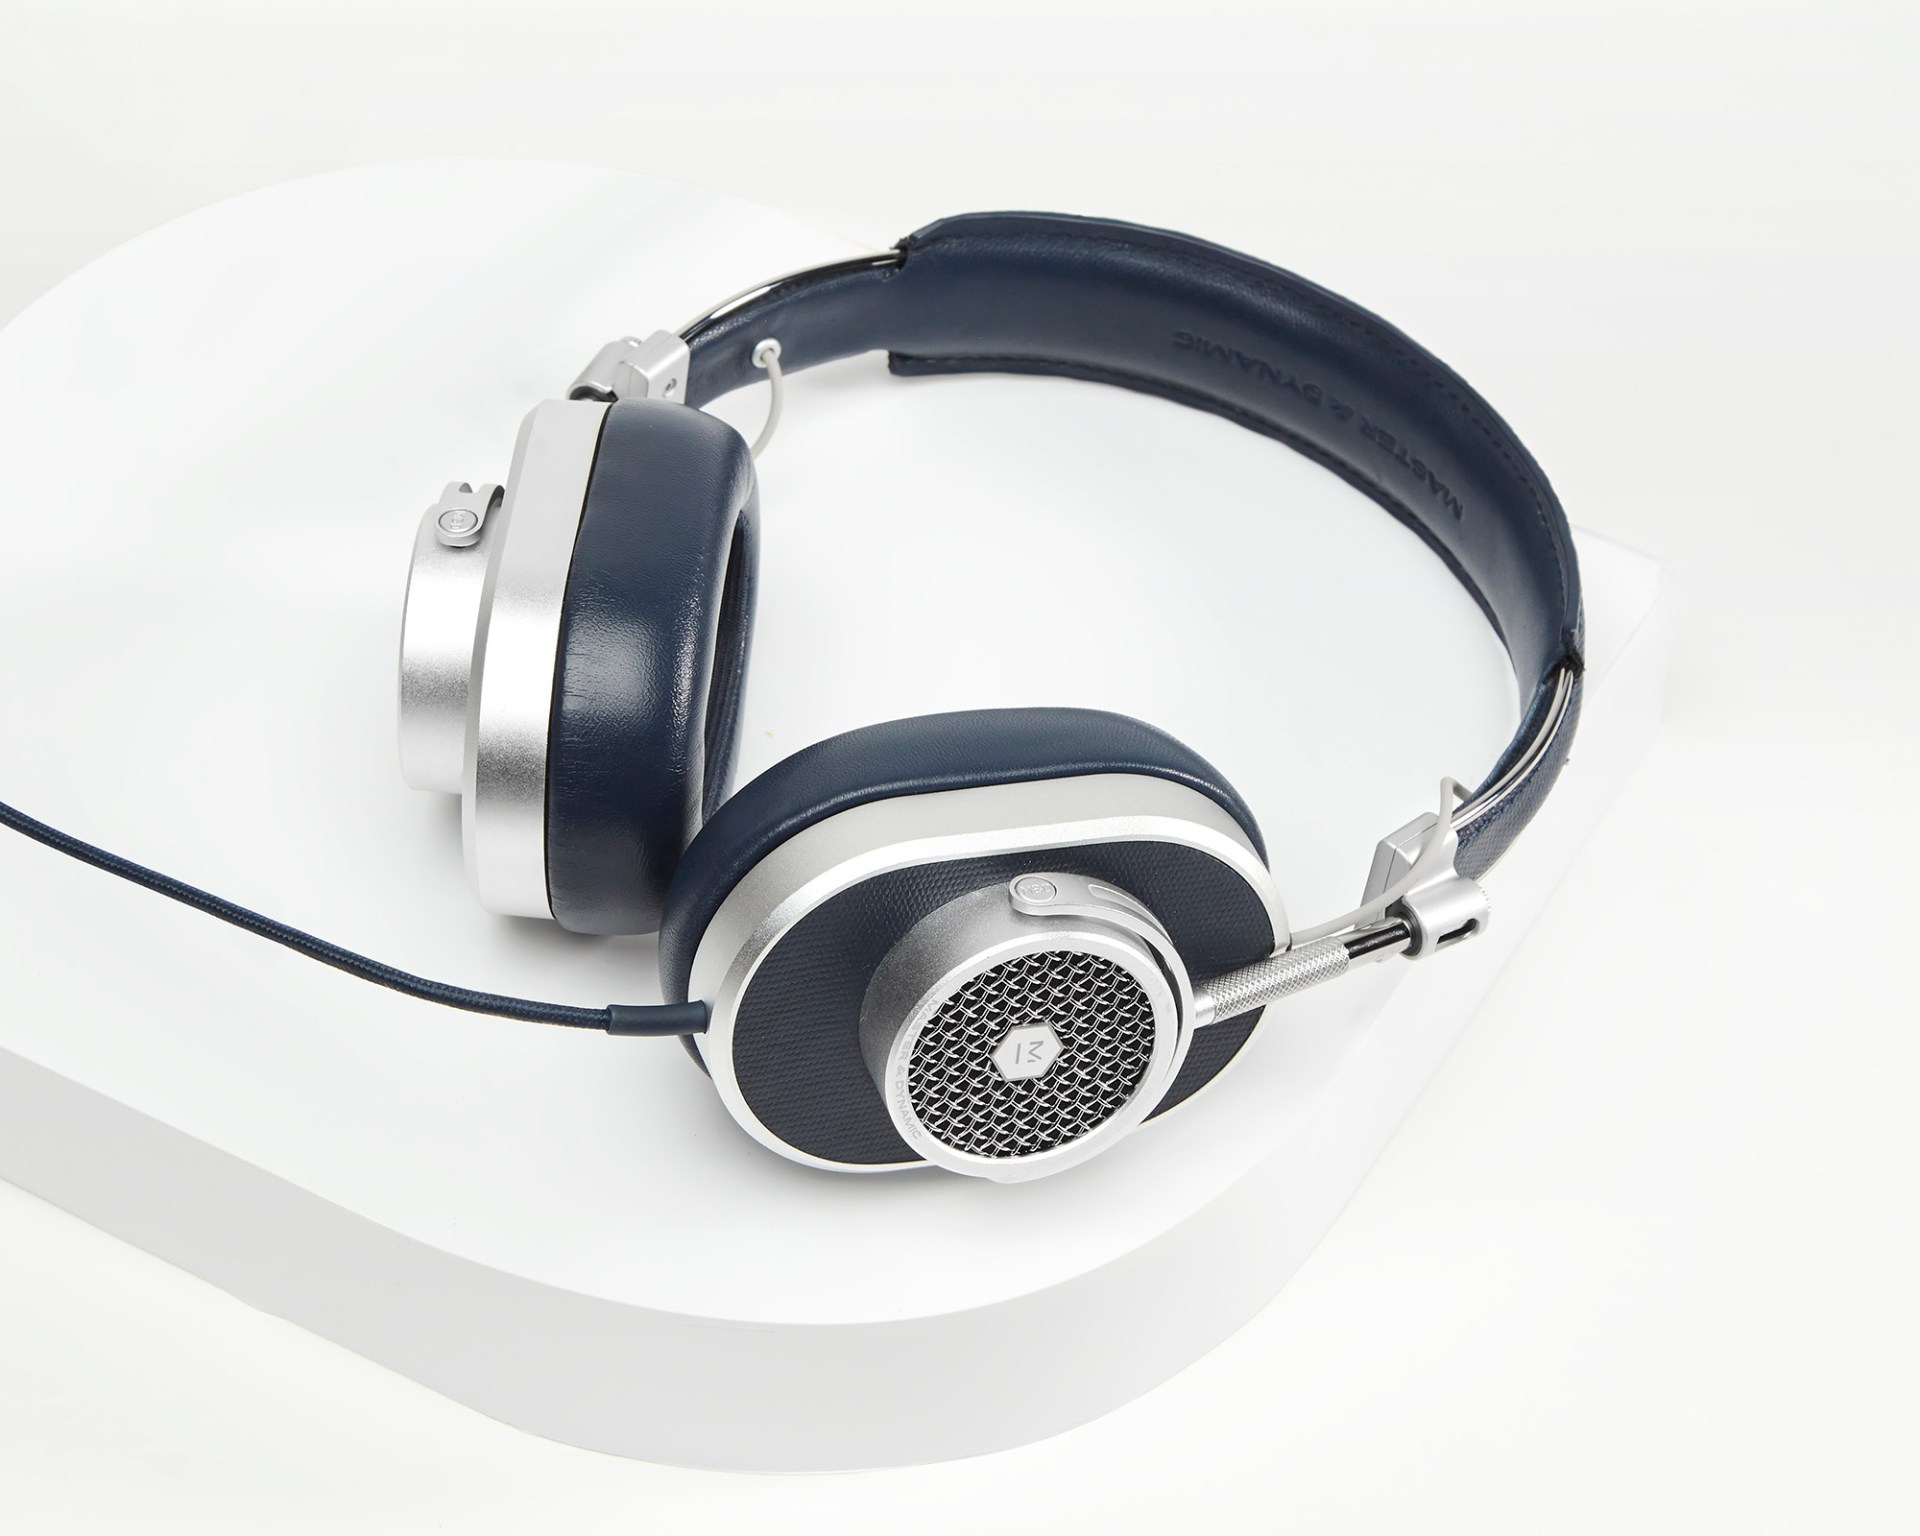 Master & Dynamic for JetBlue MH40 Over-Ear Headphones are exclusively available to experience in JetBlue Mint cabins